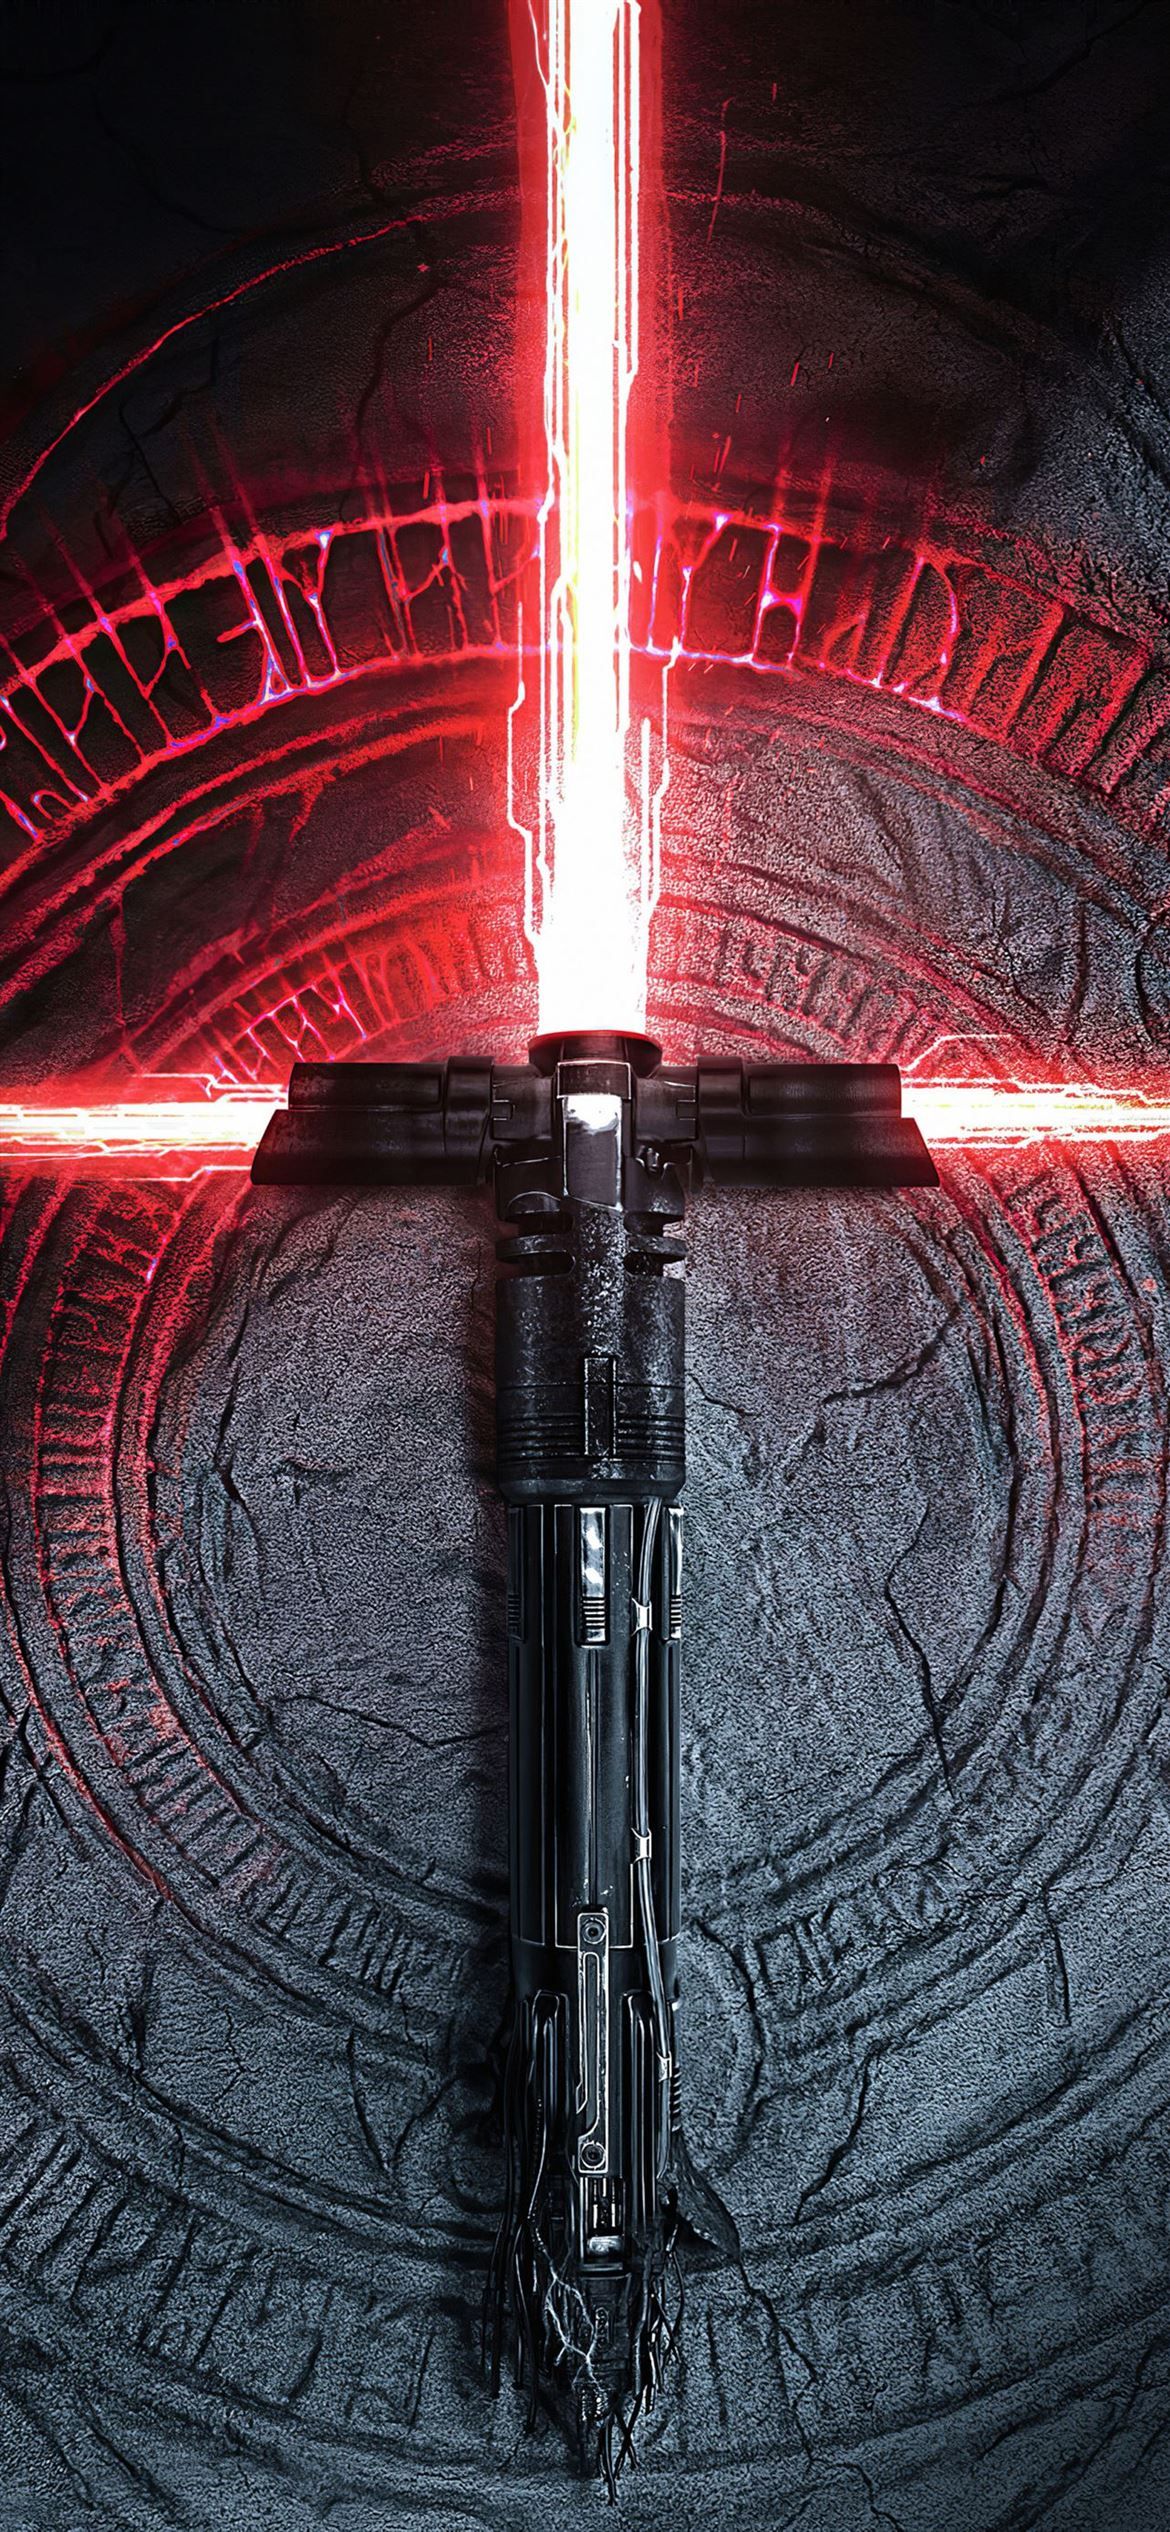 Star Wars Iphone 12 Wallpapers